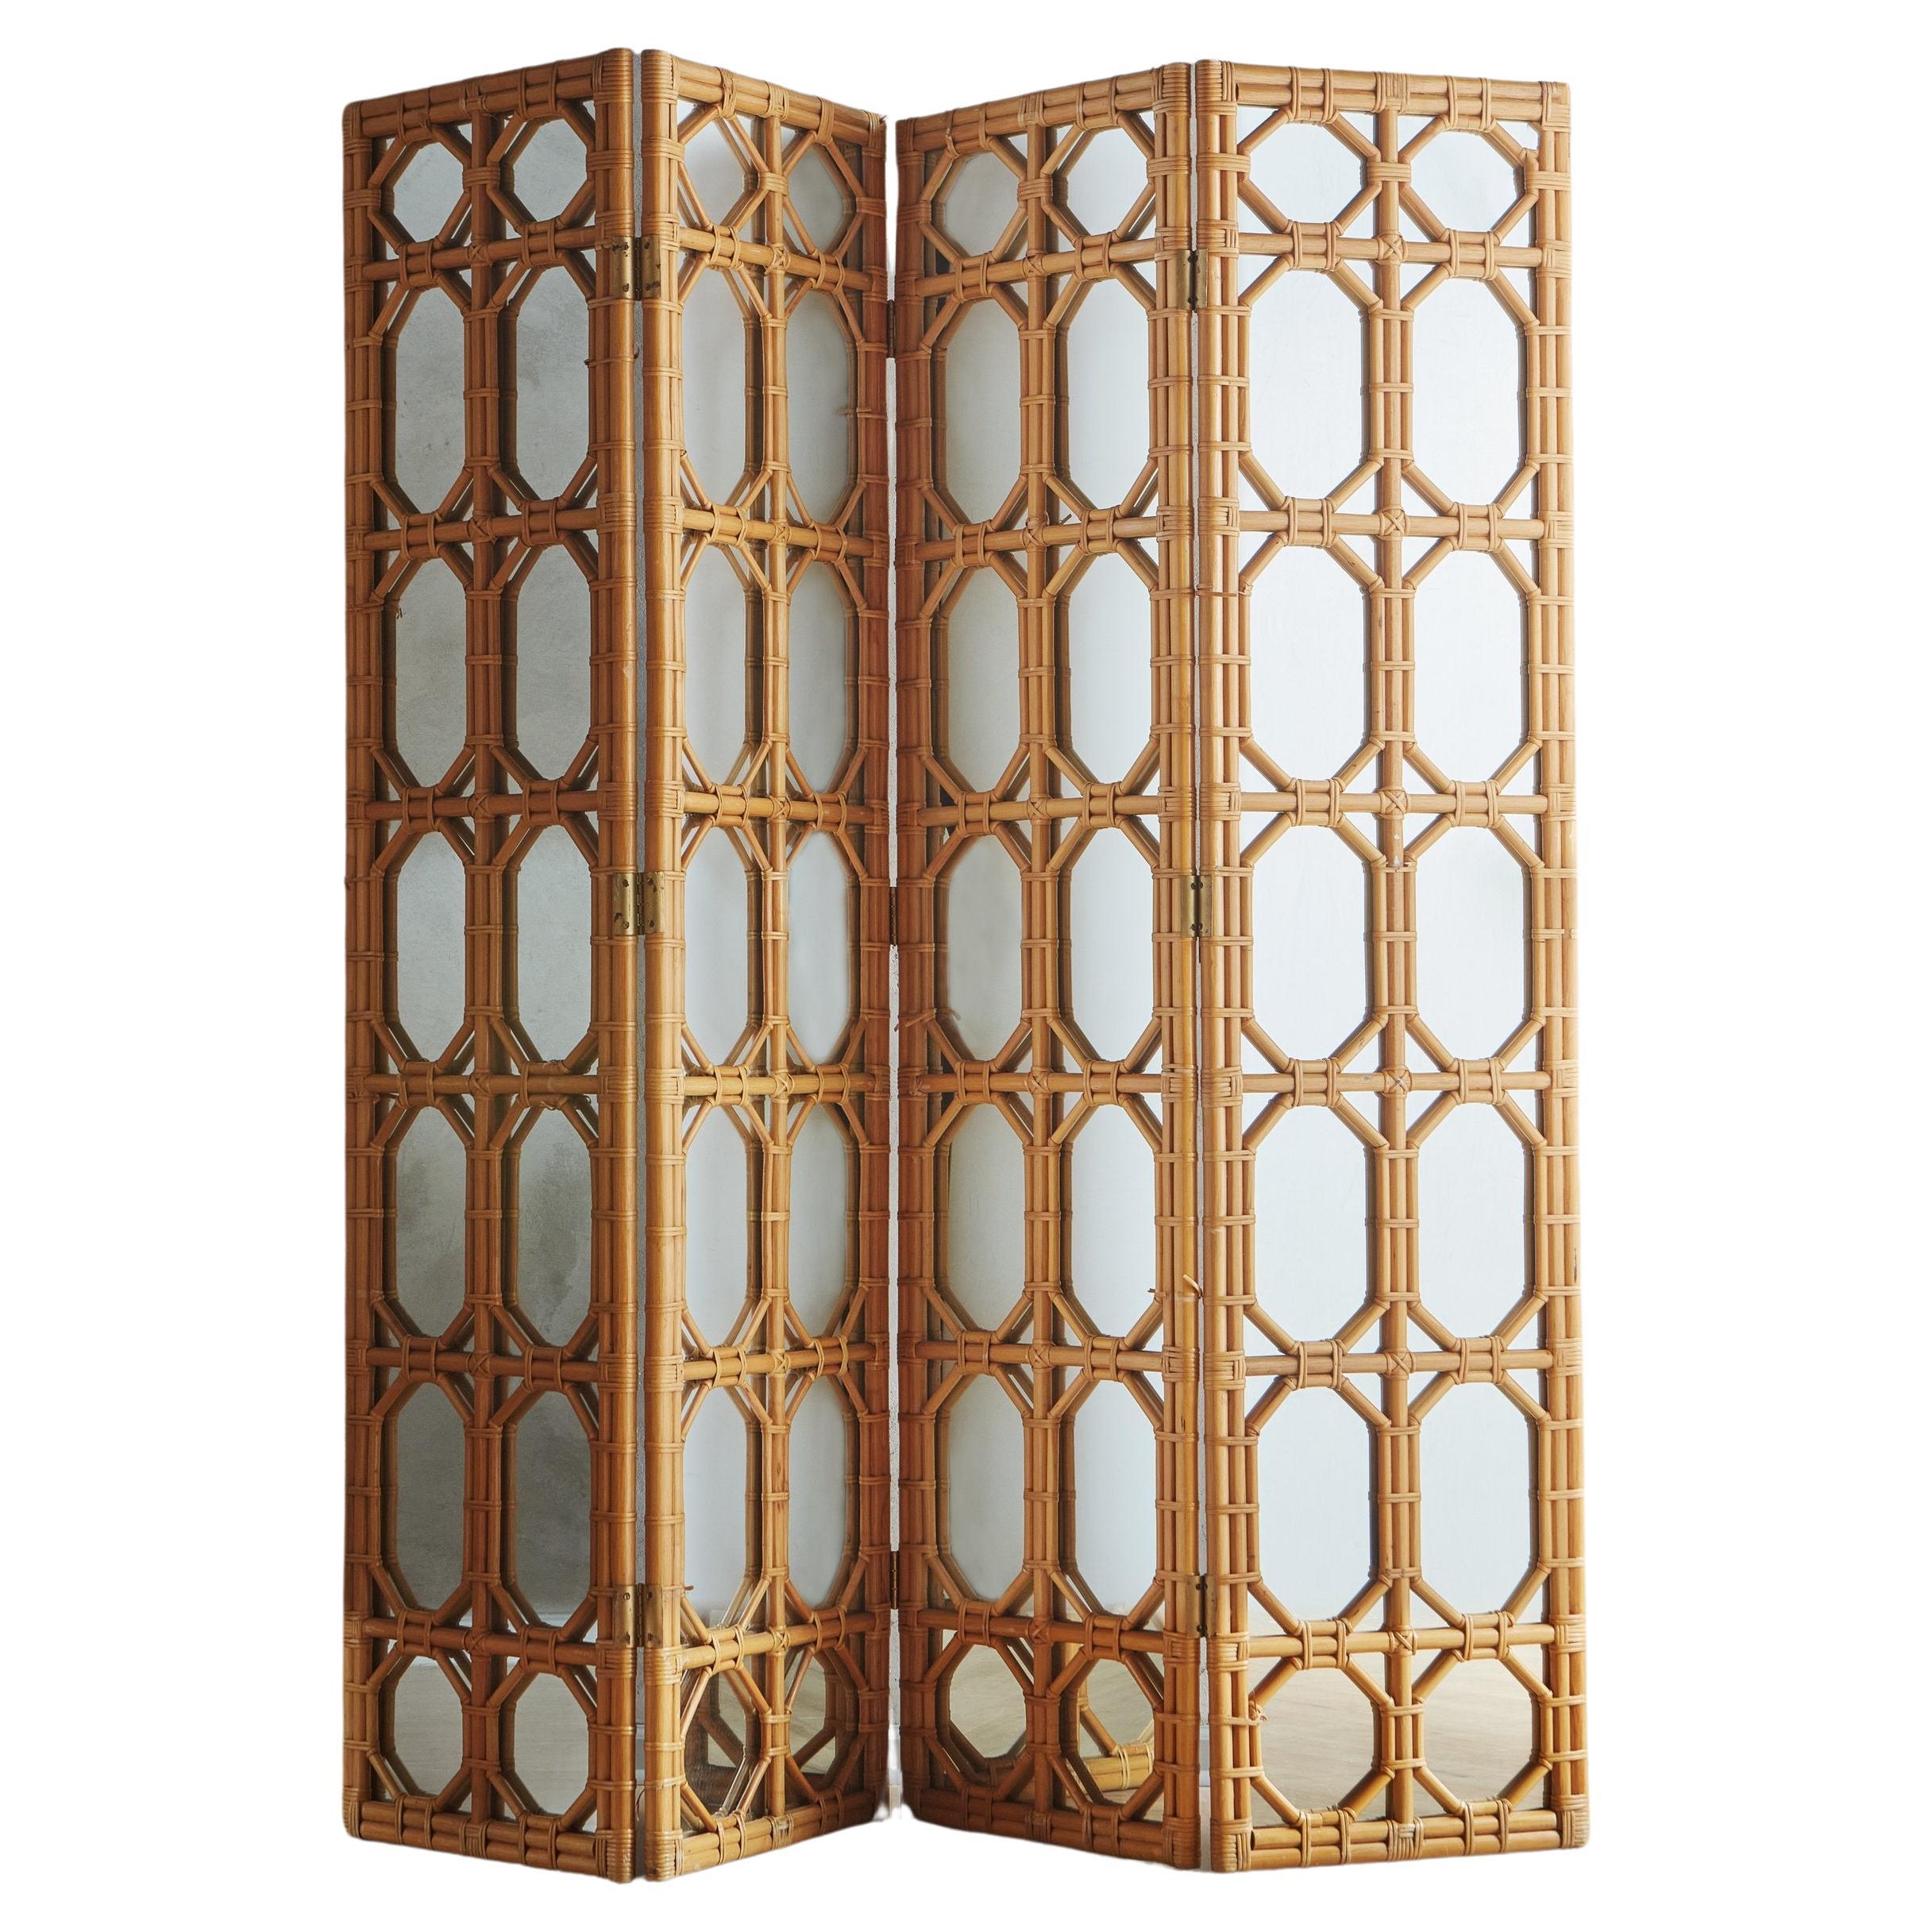 Geometric Bamboo + Cane Mirrored Divider or Screen, 20th Century For Sale